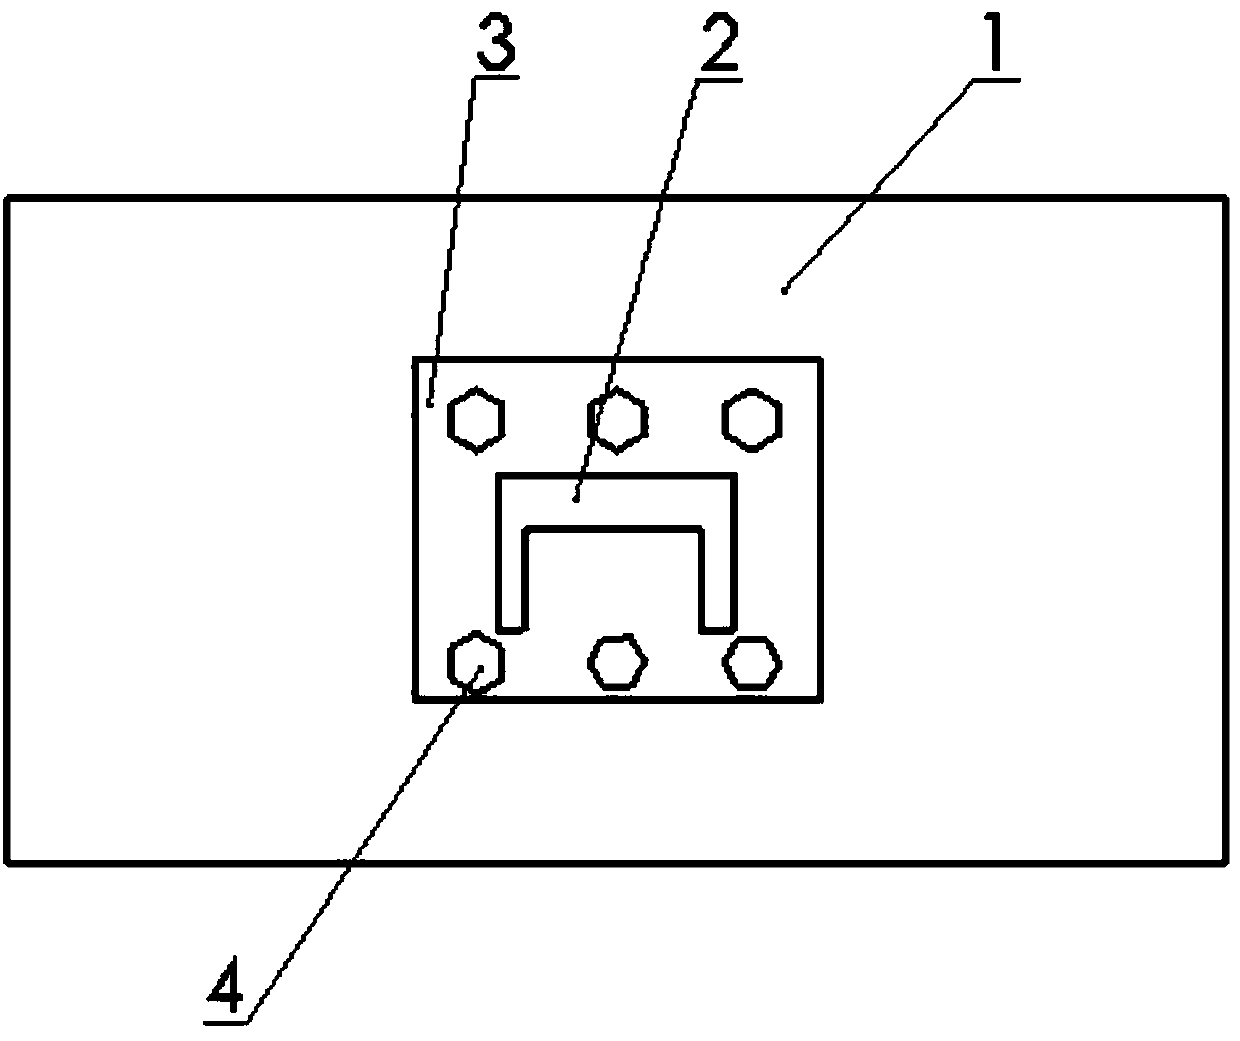 Connection structure of concrete steel column and profile steel